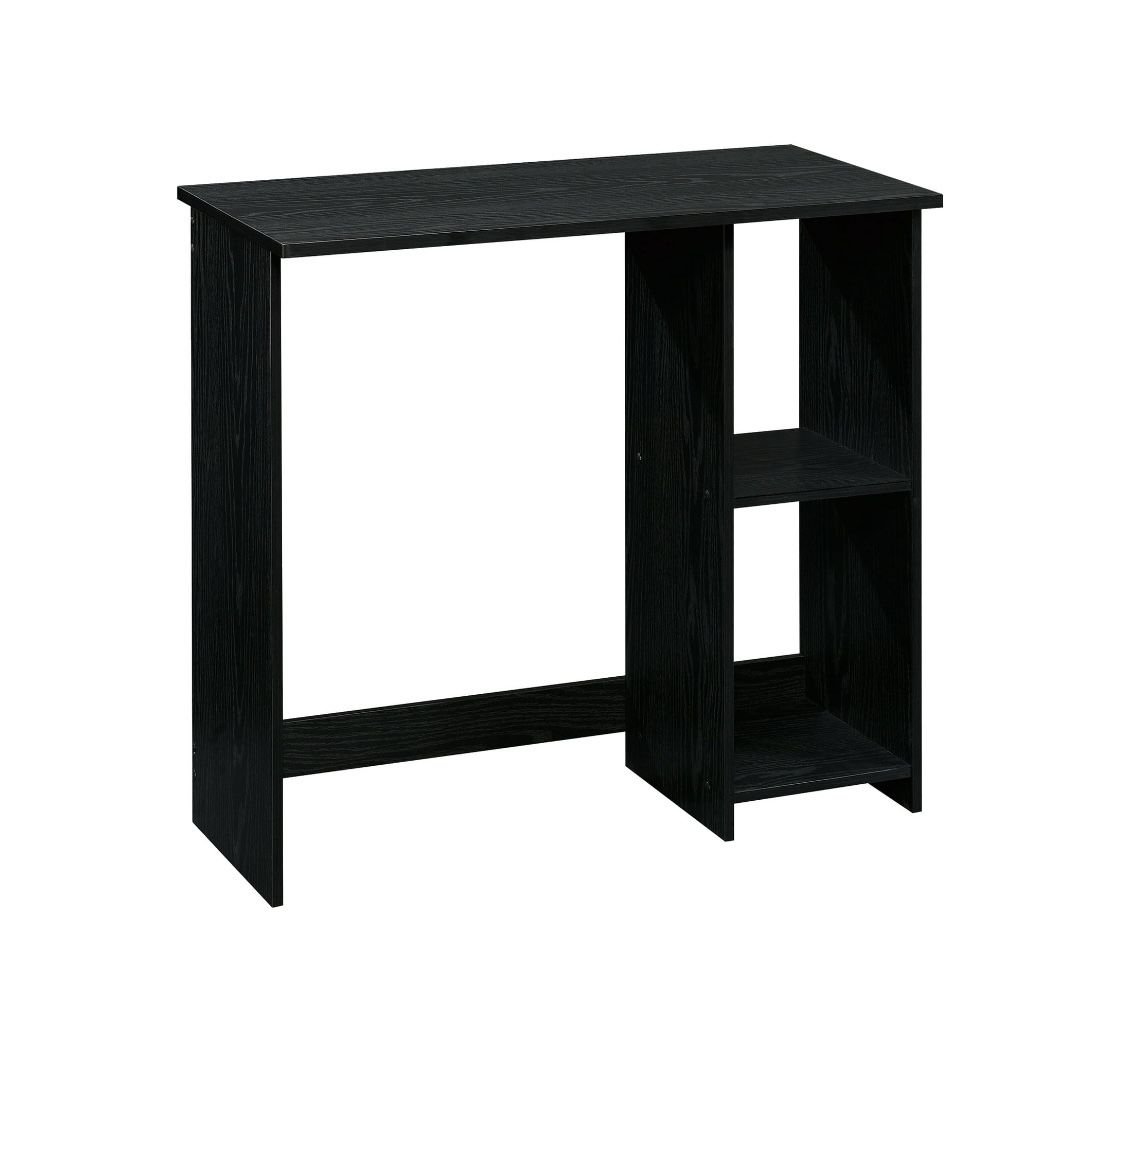 Mainstays Small Space Writing Desk with 2 Shelves, True Black Oak Finish